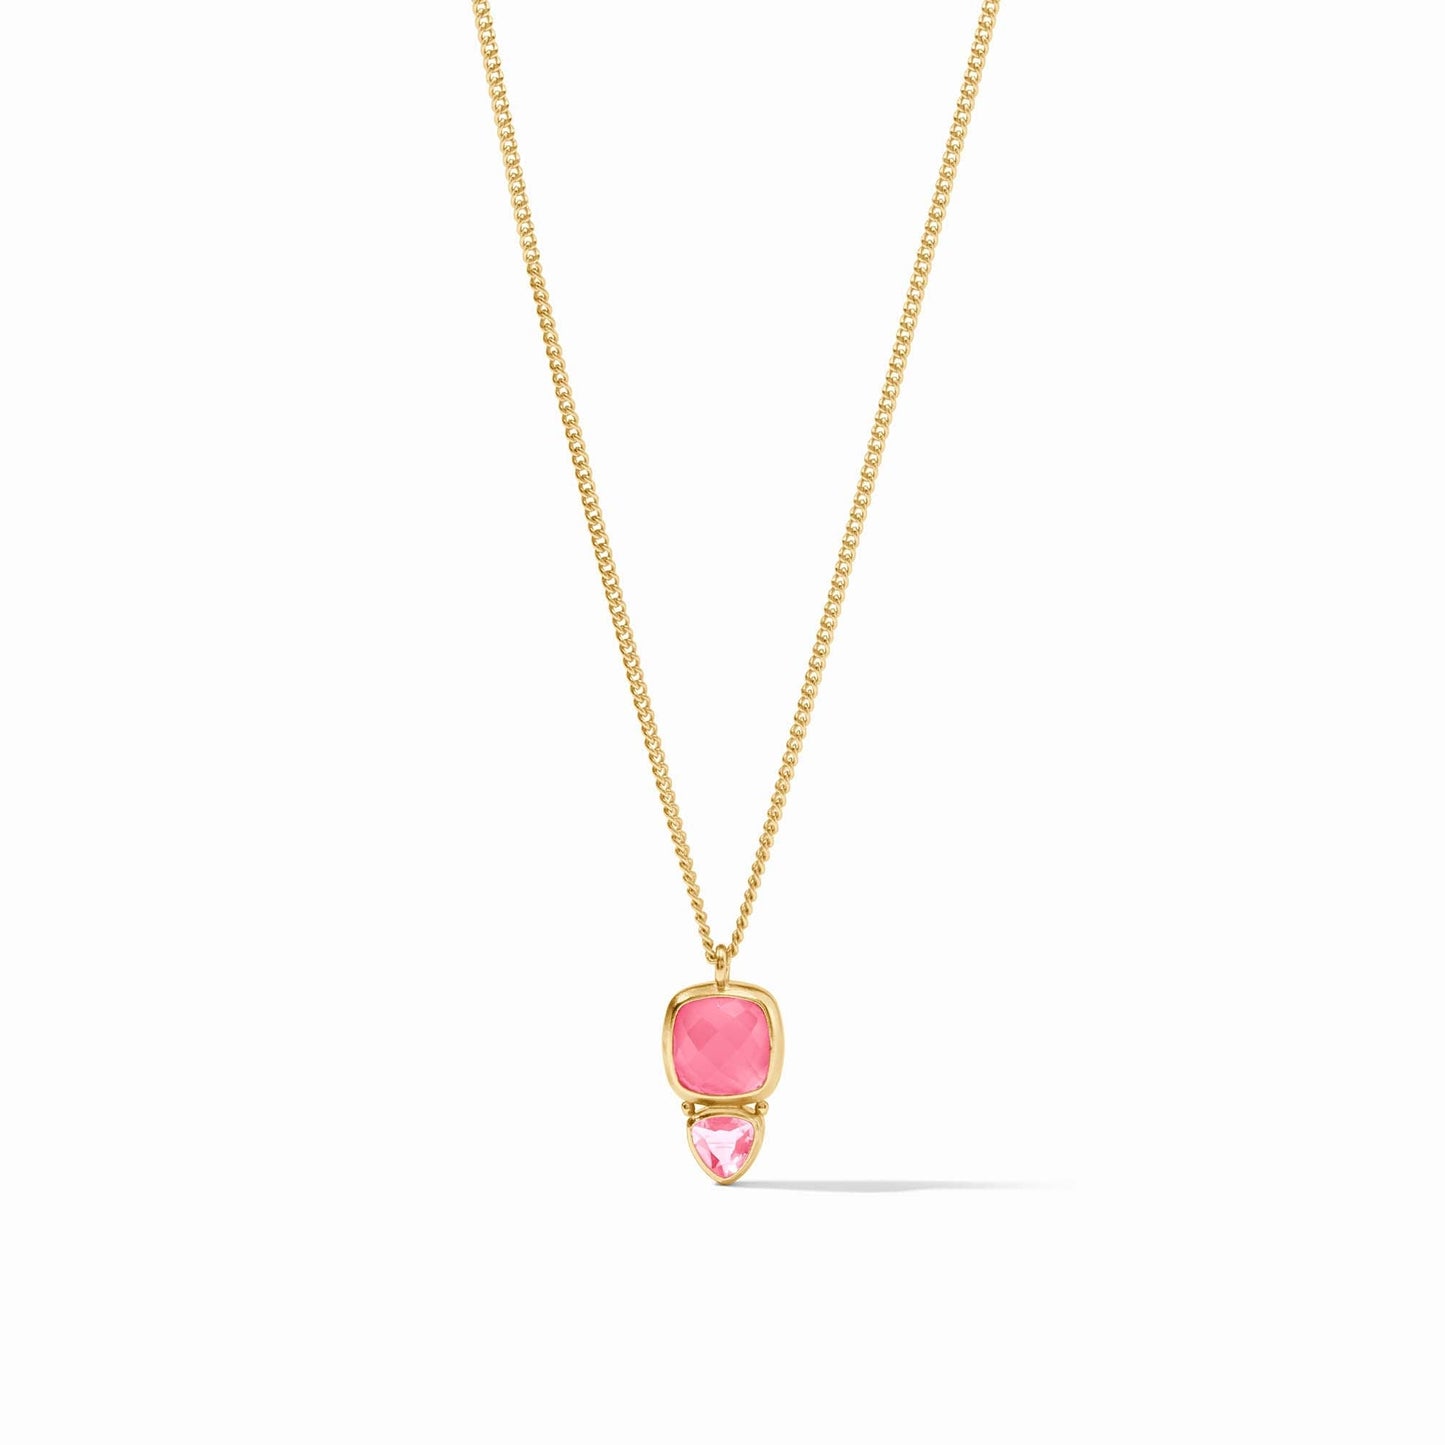 Aquitaine Duo Delicate Necklace - Peony Pink